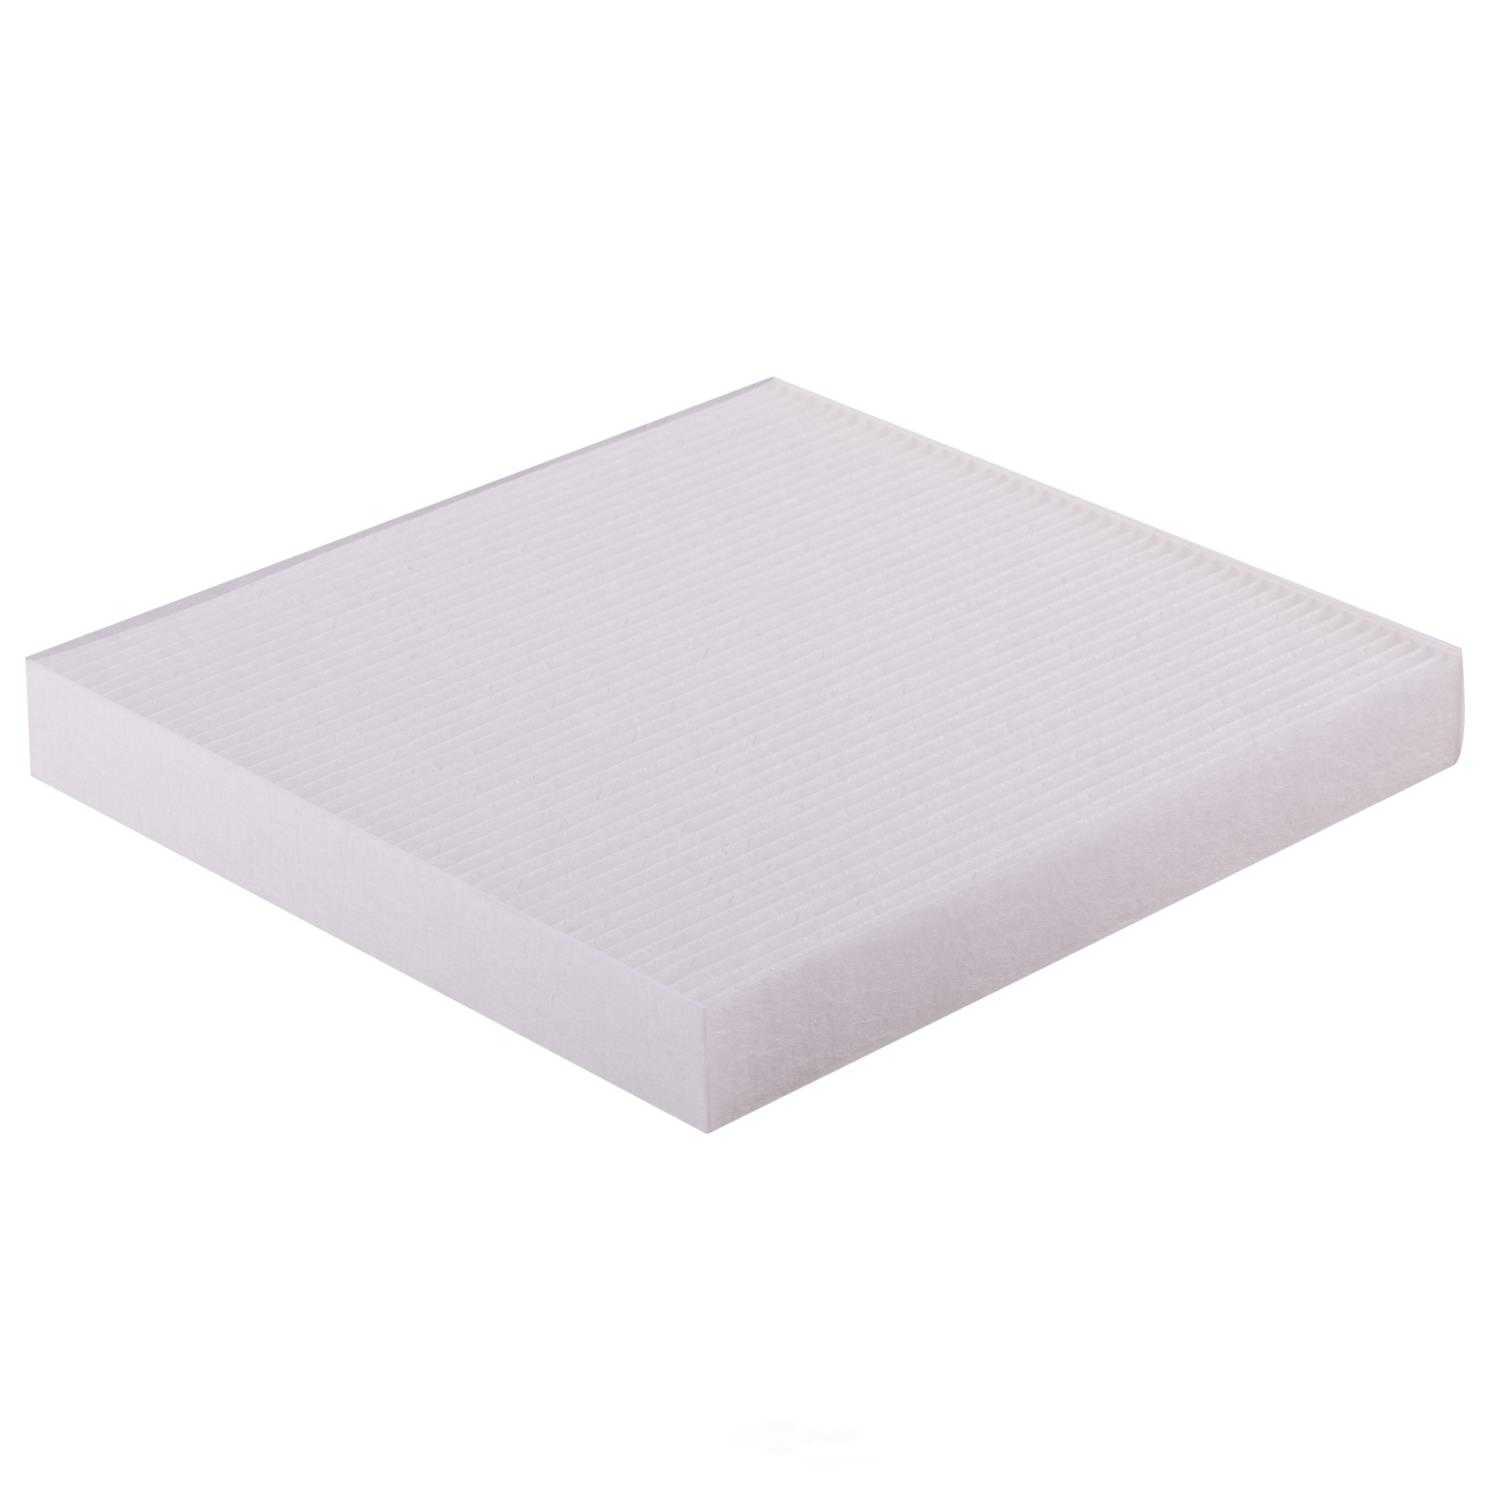 PRONTO/ID USA - Cabin Air Filter - PNP PC5519